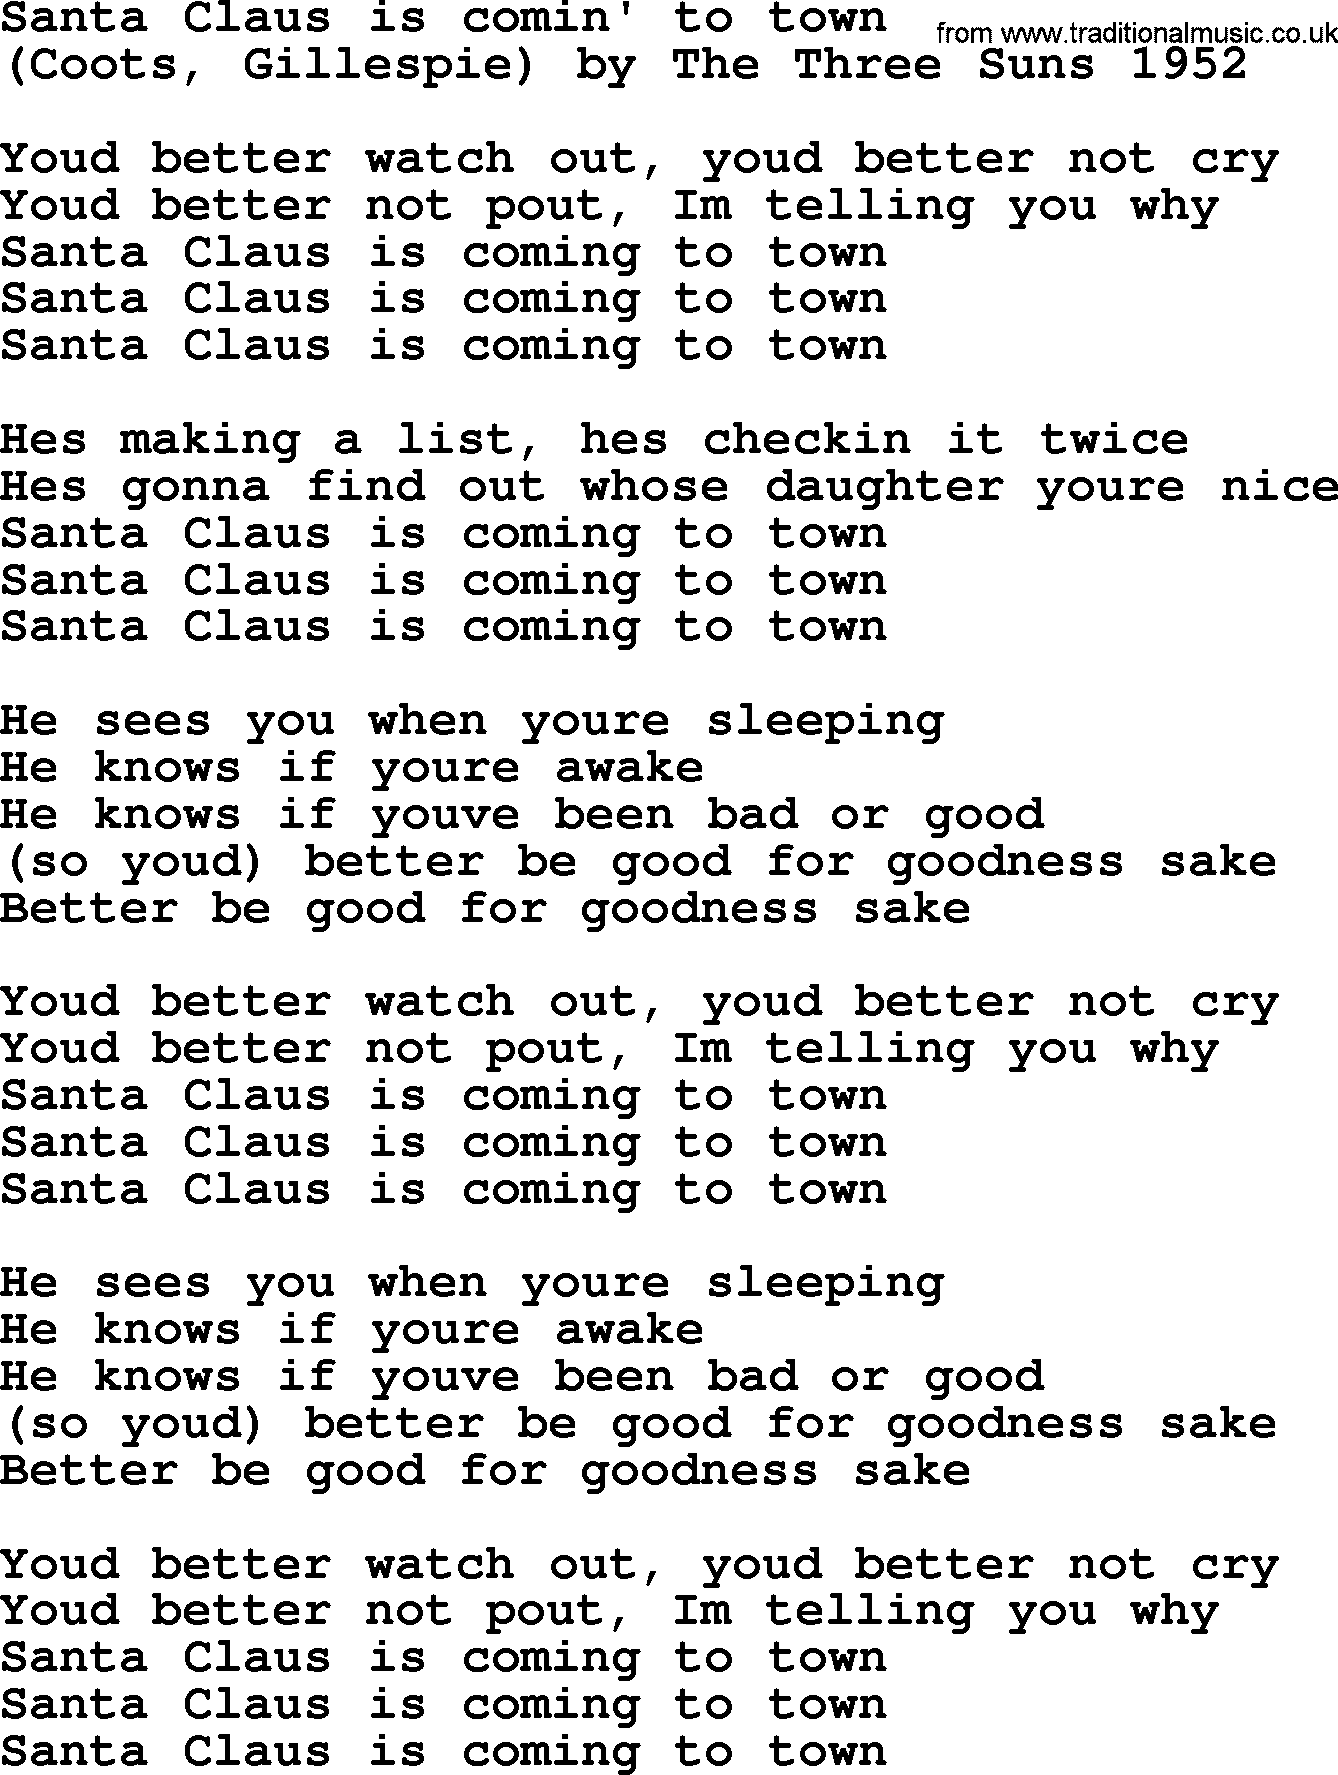 Bruce Springsteen song: Santa Claus Is Comin' To Town, lyrics